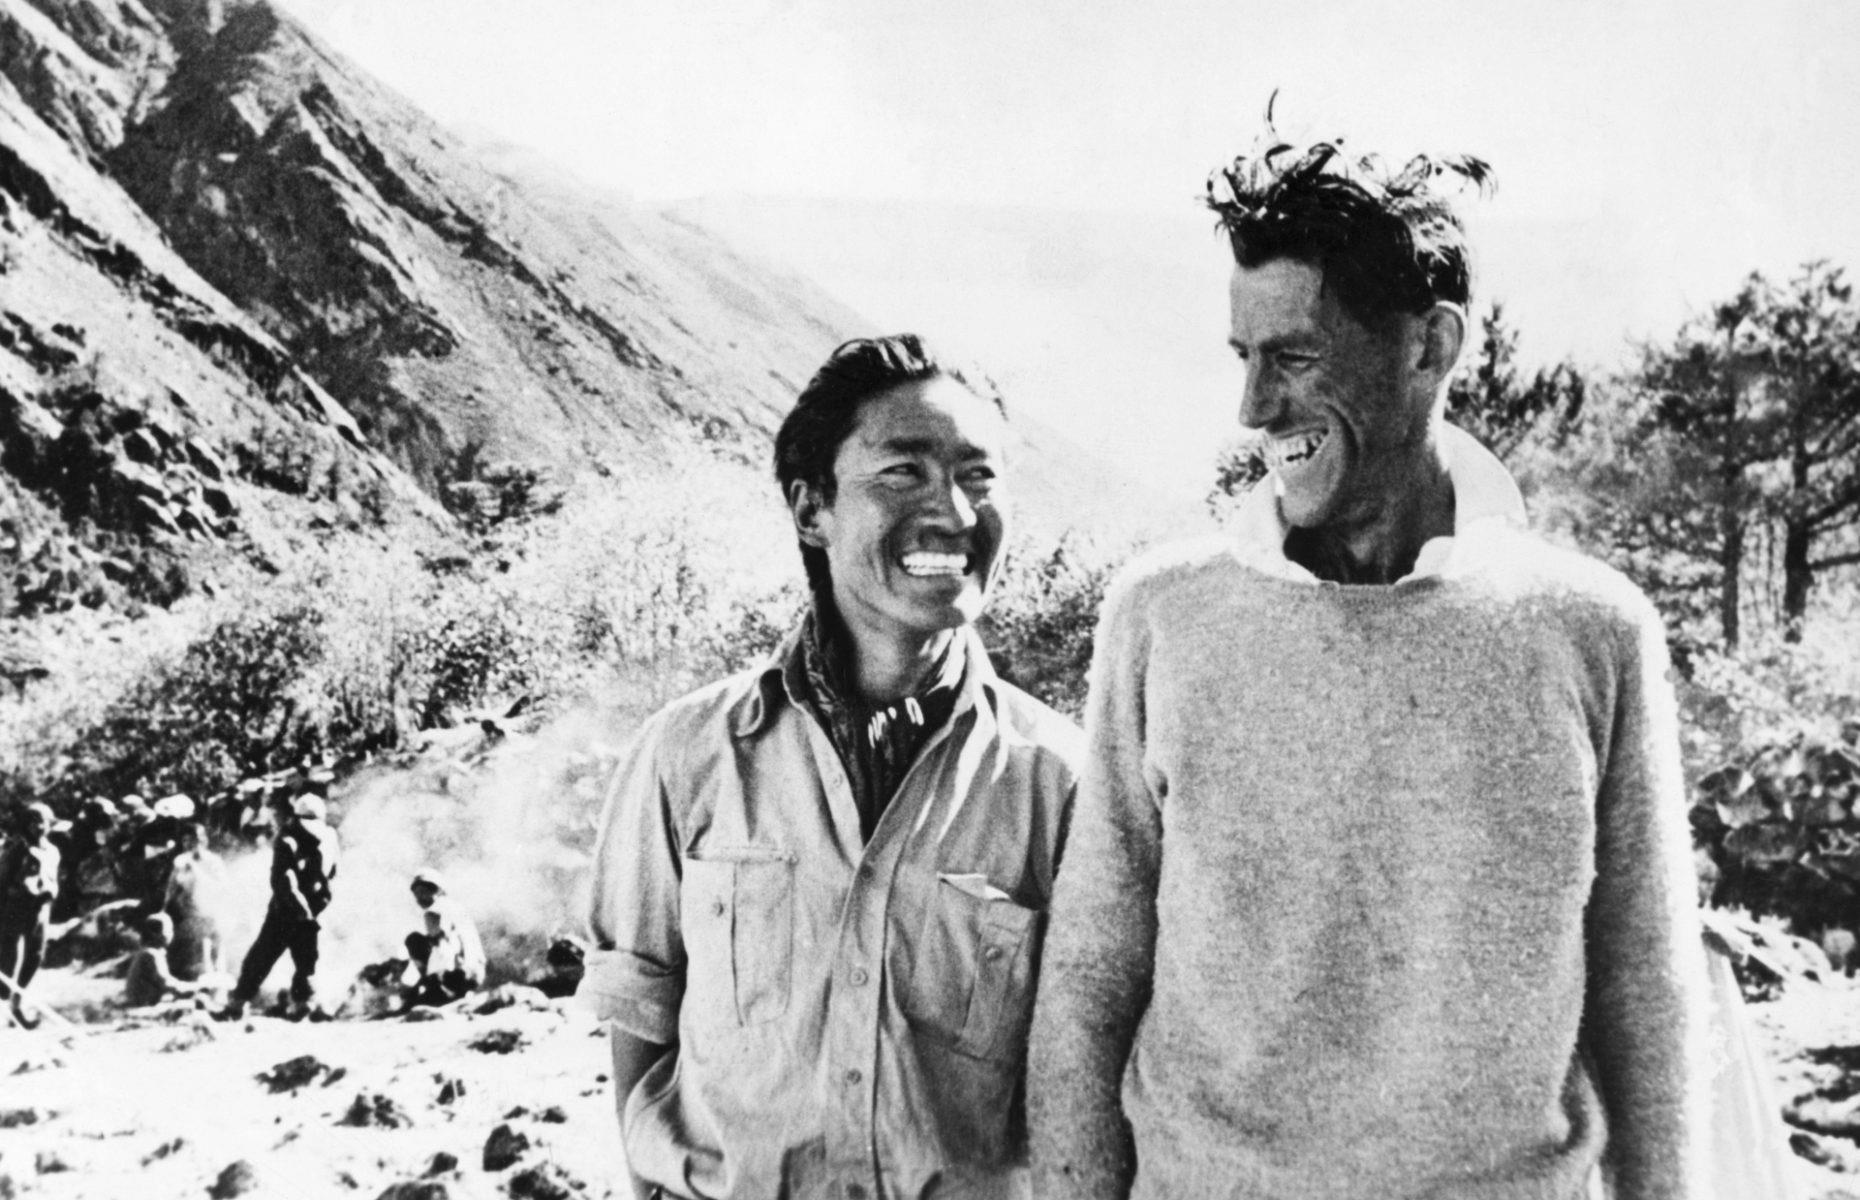 <p>On 29 May 1953, Sir Edmund Hillary, a New Zealand mountaineer, and Tenzing Norgay, a Nepali Sherpa, became the first explorers to reach Everest’s storied summit. The pair were part of a British expedition sponsored by the Royal Geographical Society. Two members of their group, Charles Evans and Tom Bourdillon, had made it within 300 feet (91m) of the summit a couple of days prior but had had to turn back because one of their oxygen tanks stopped working. The news of Hillary and Norgay’s achievement reverberated around the world on 2 June, the day of Queen Elizabeth II’s coronation.</p>